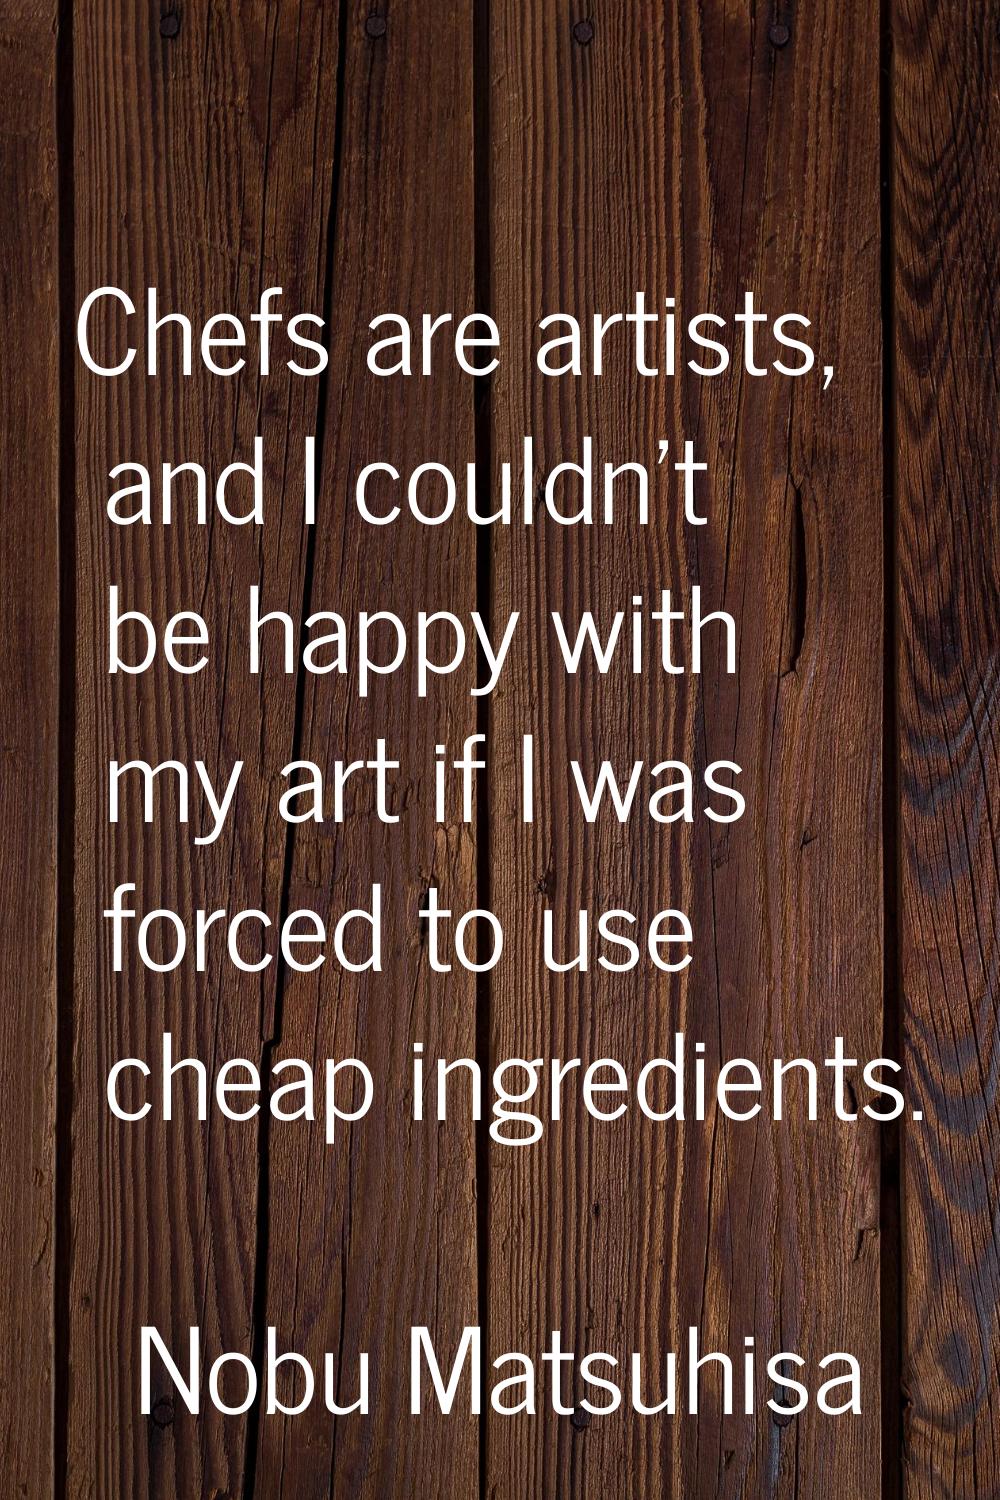 Chefs are artists, and I couldn't be happy with my art if I was forced to use cheap ingredients.